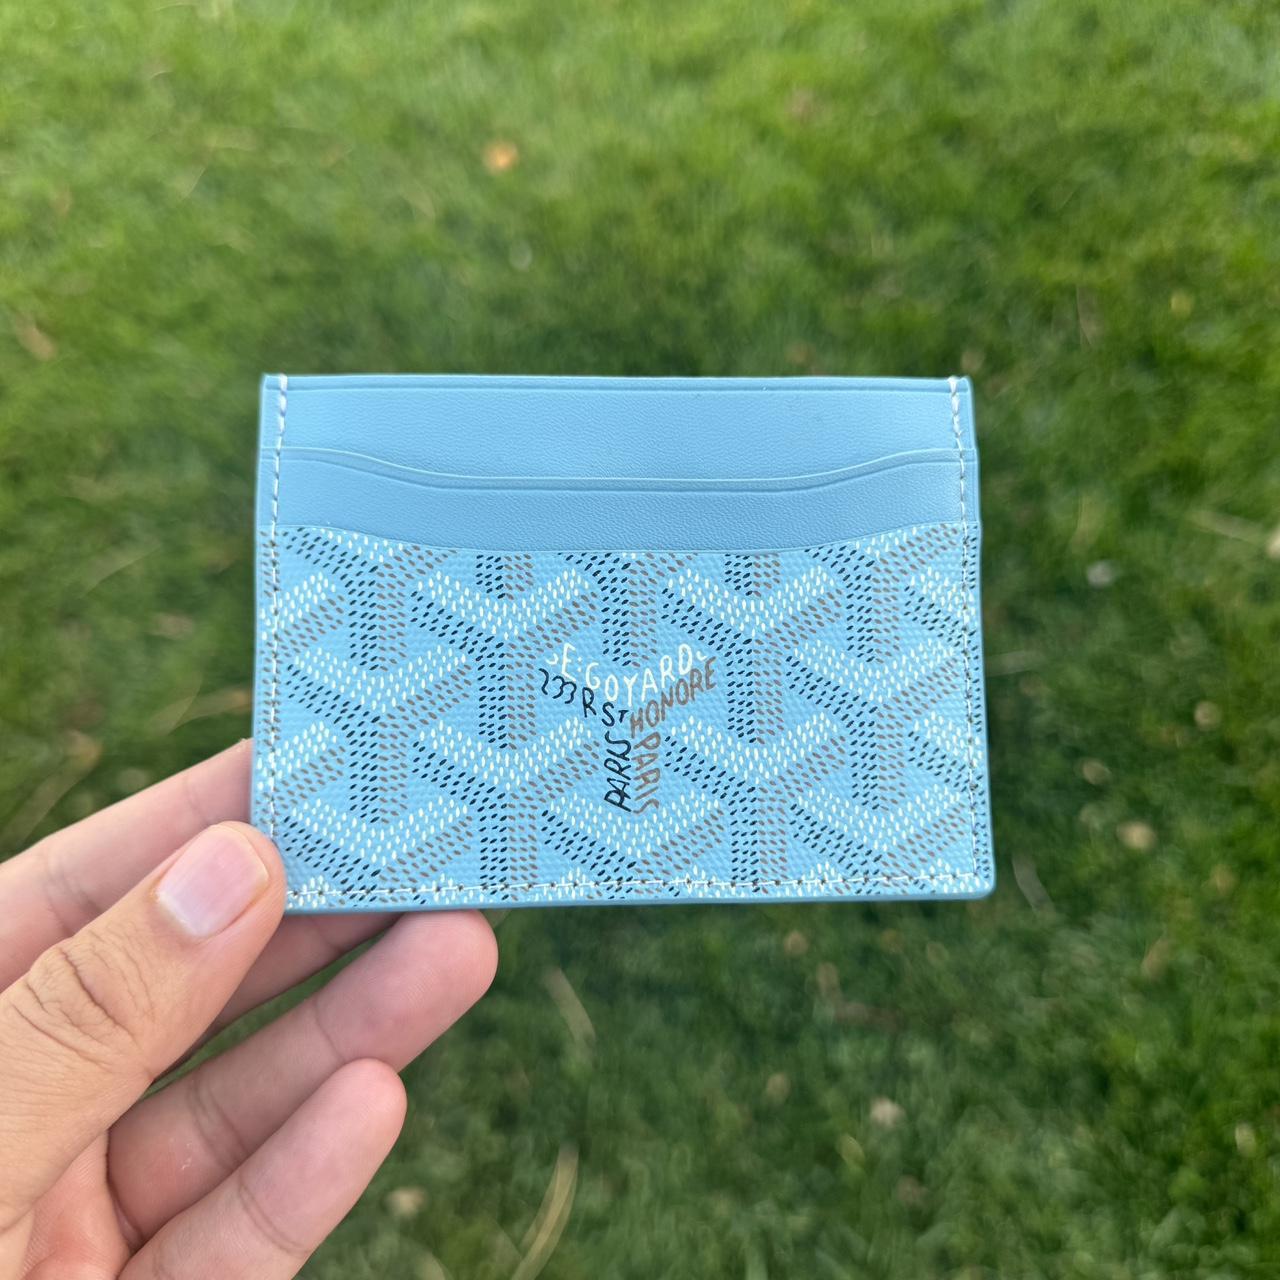 Lovely Authentic blue Goyard pouch from handbag. Has - Depop